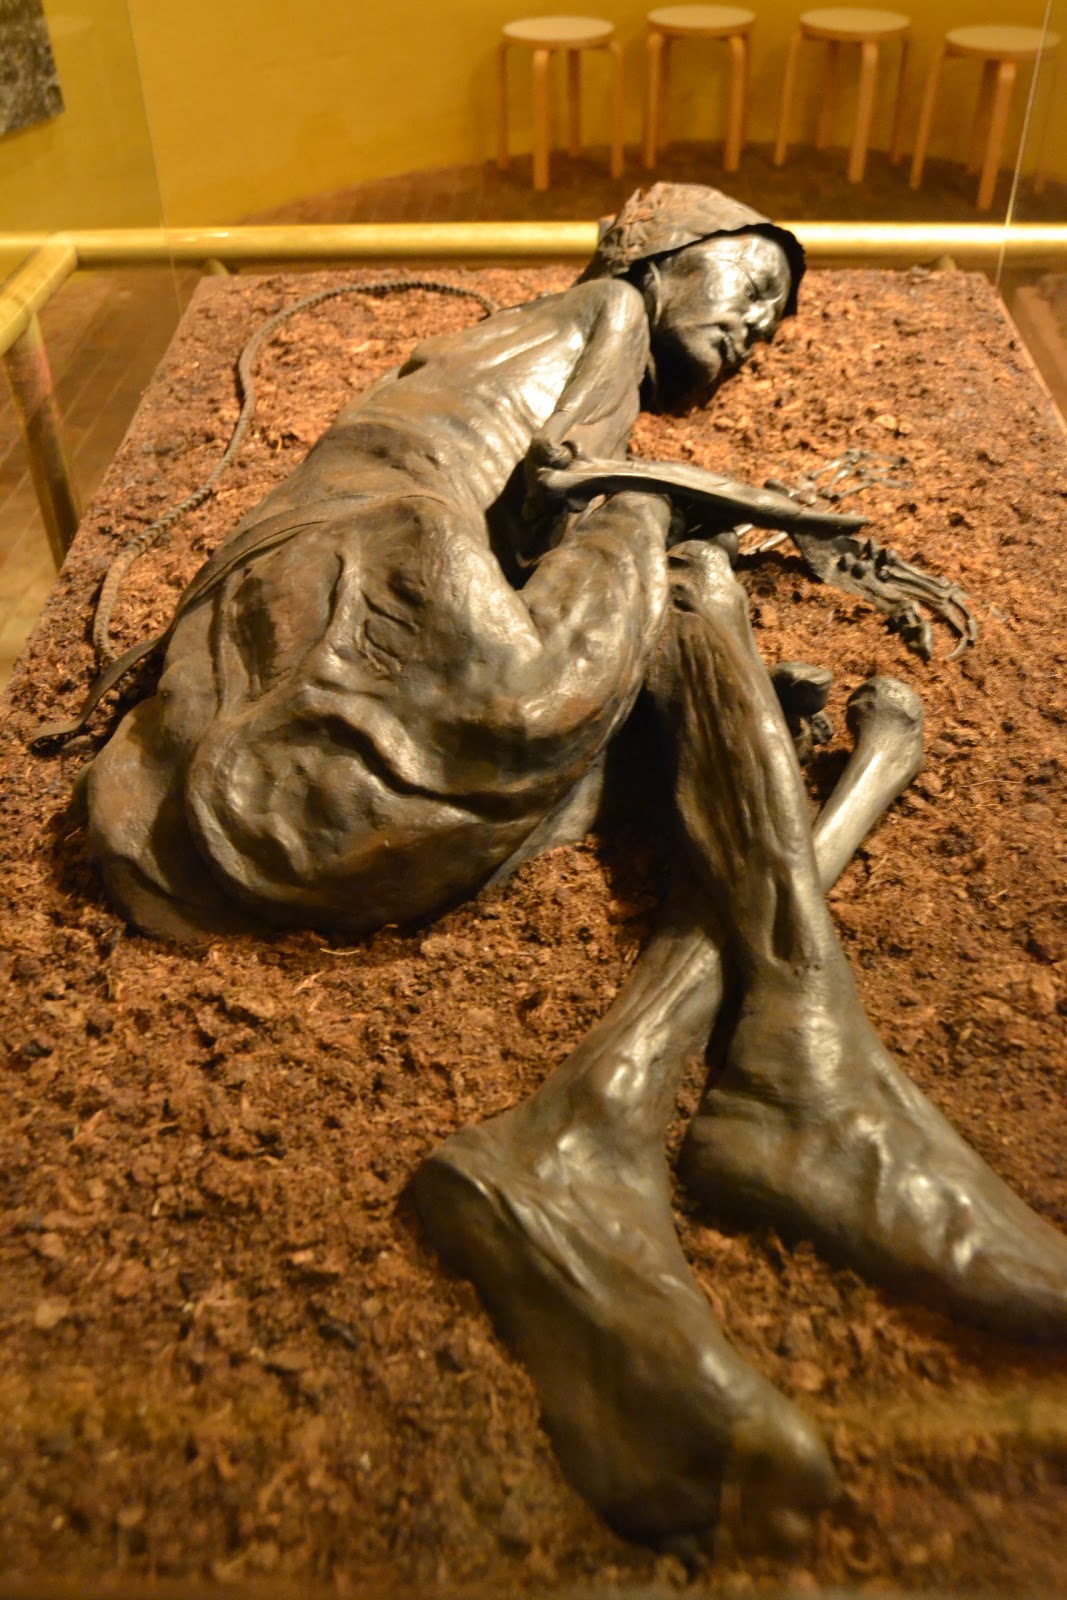 Overview of the whole tollund man mummy placed in a box filled with sand